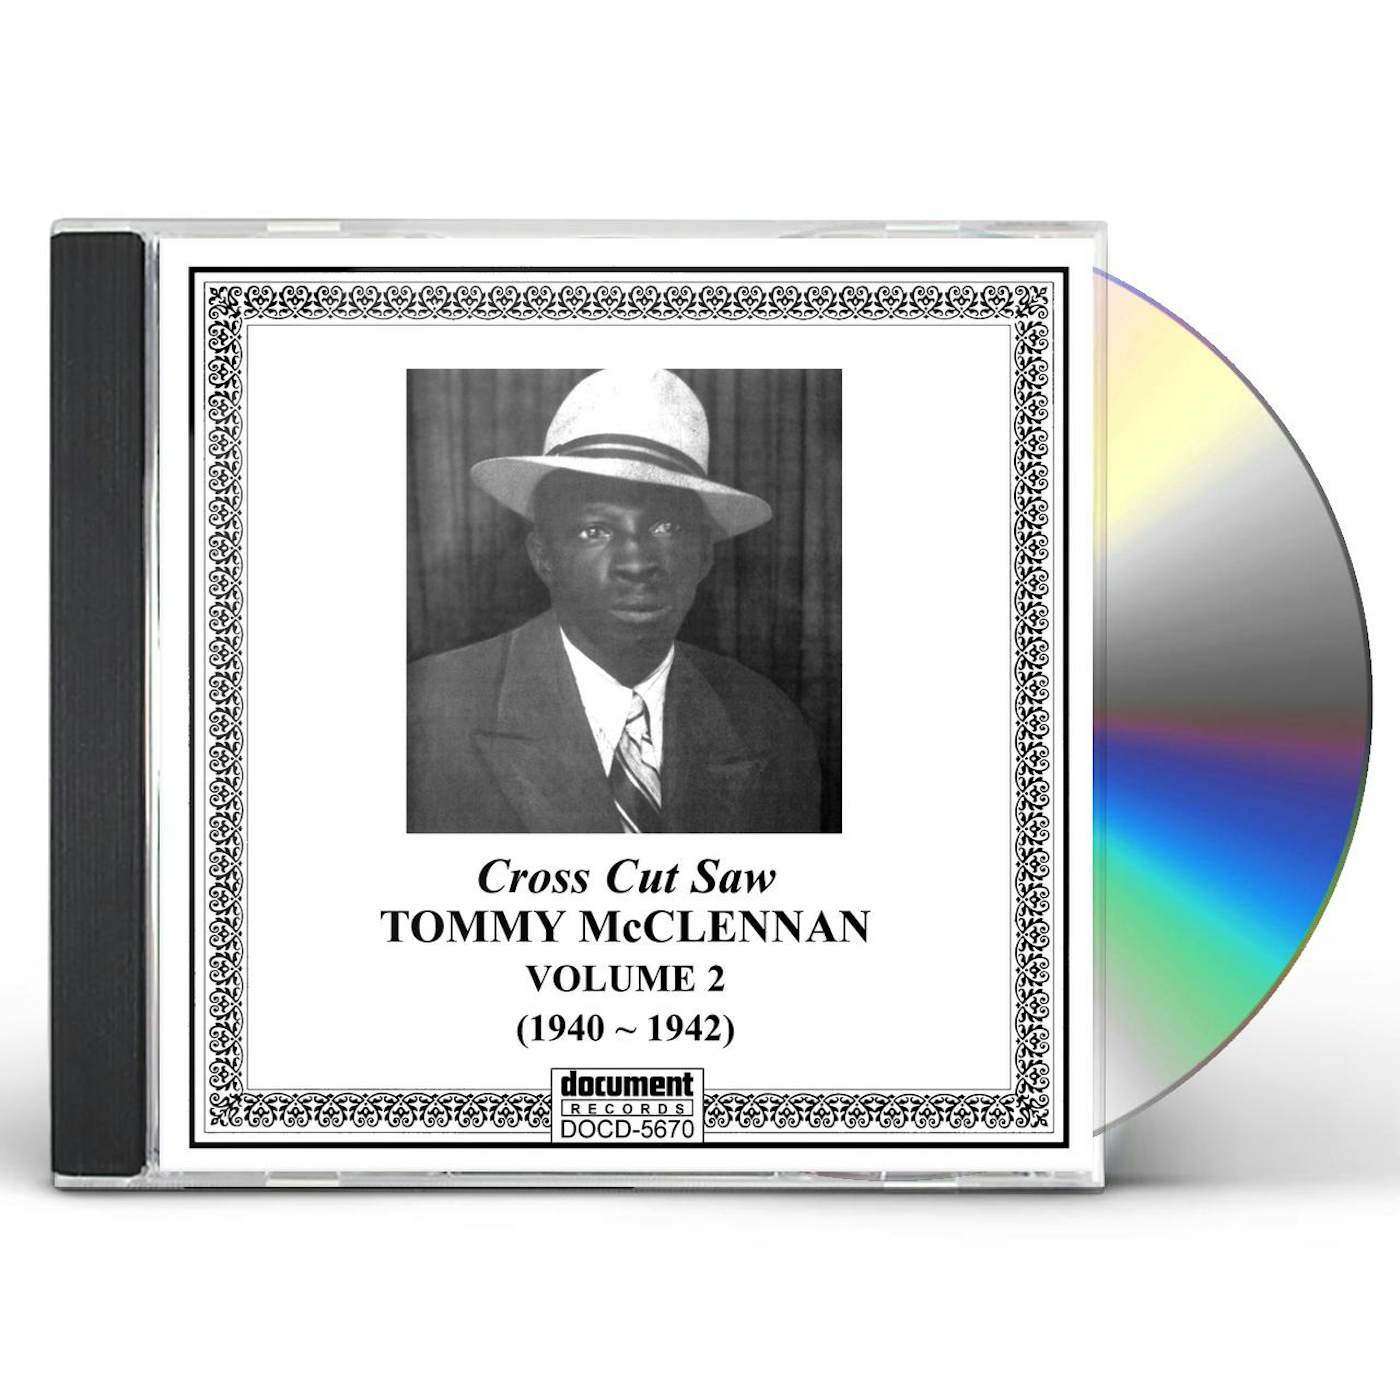 Tommy McClennan COMPLETE RECORDED WORKS VOL. 2: CROSS CUT SAW CD